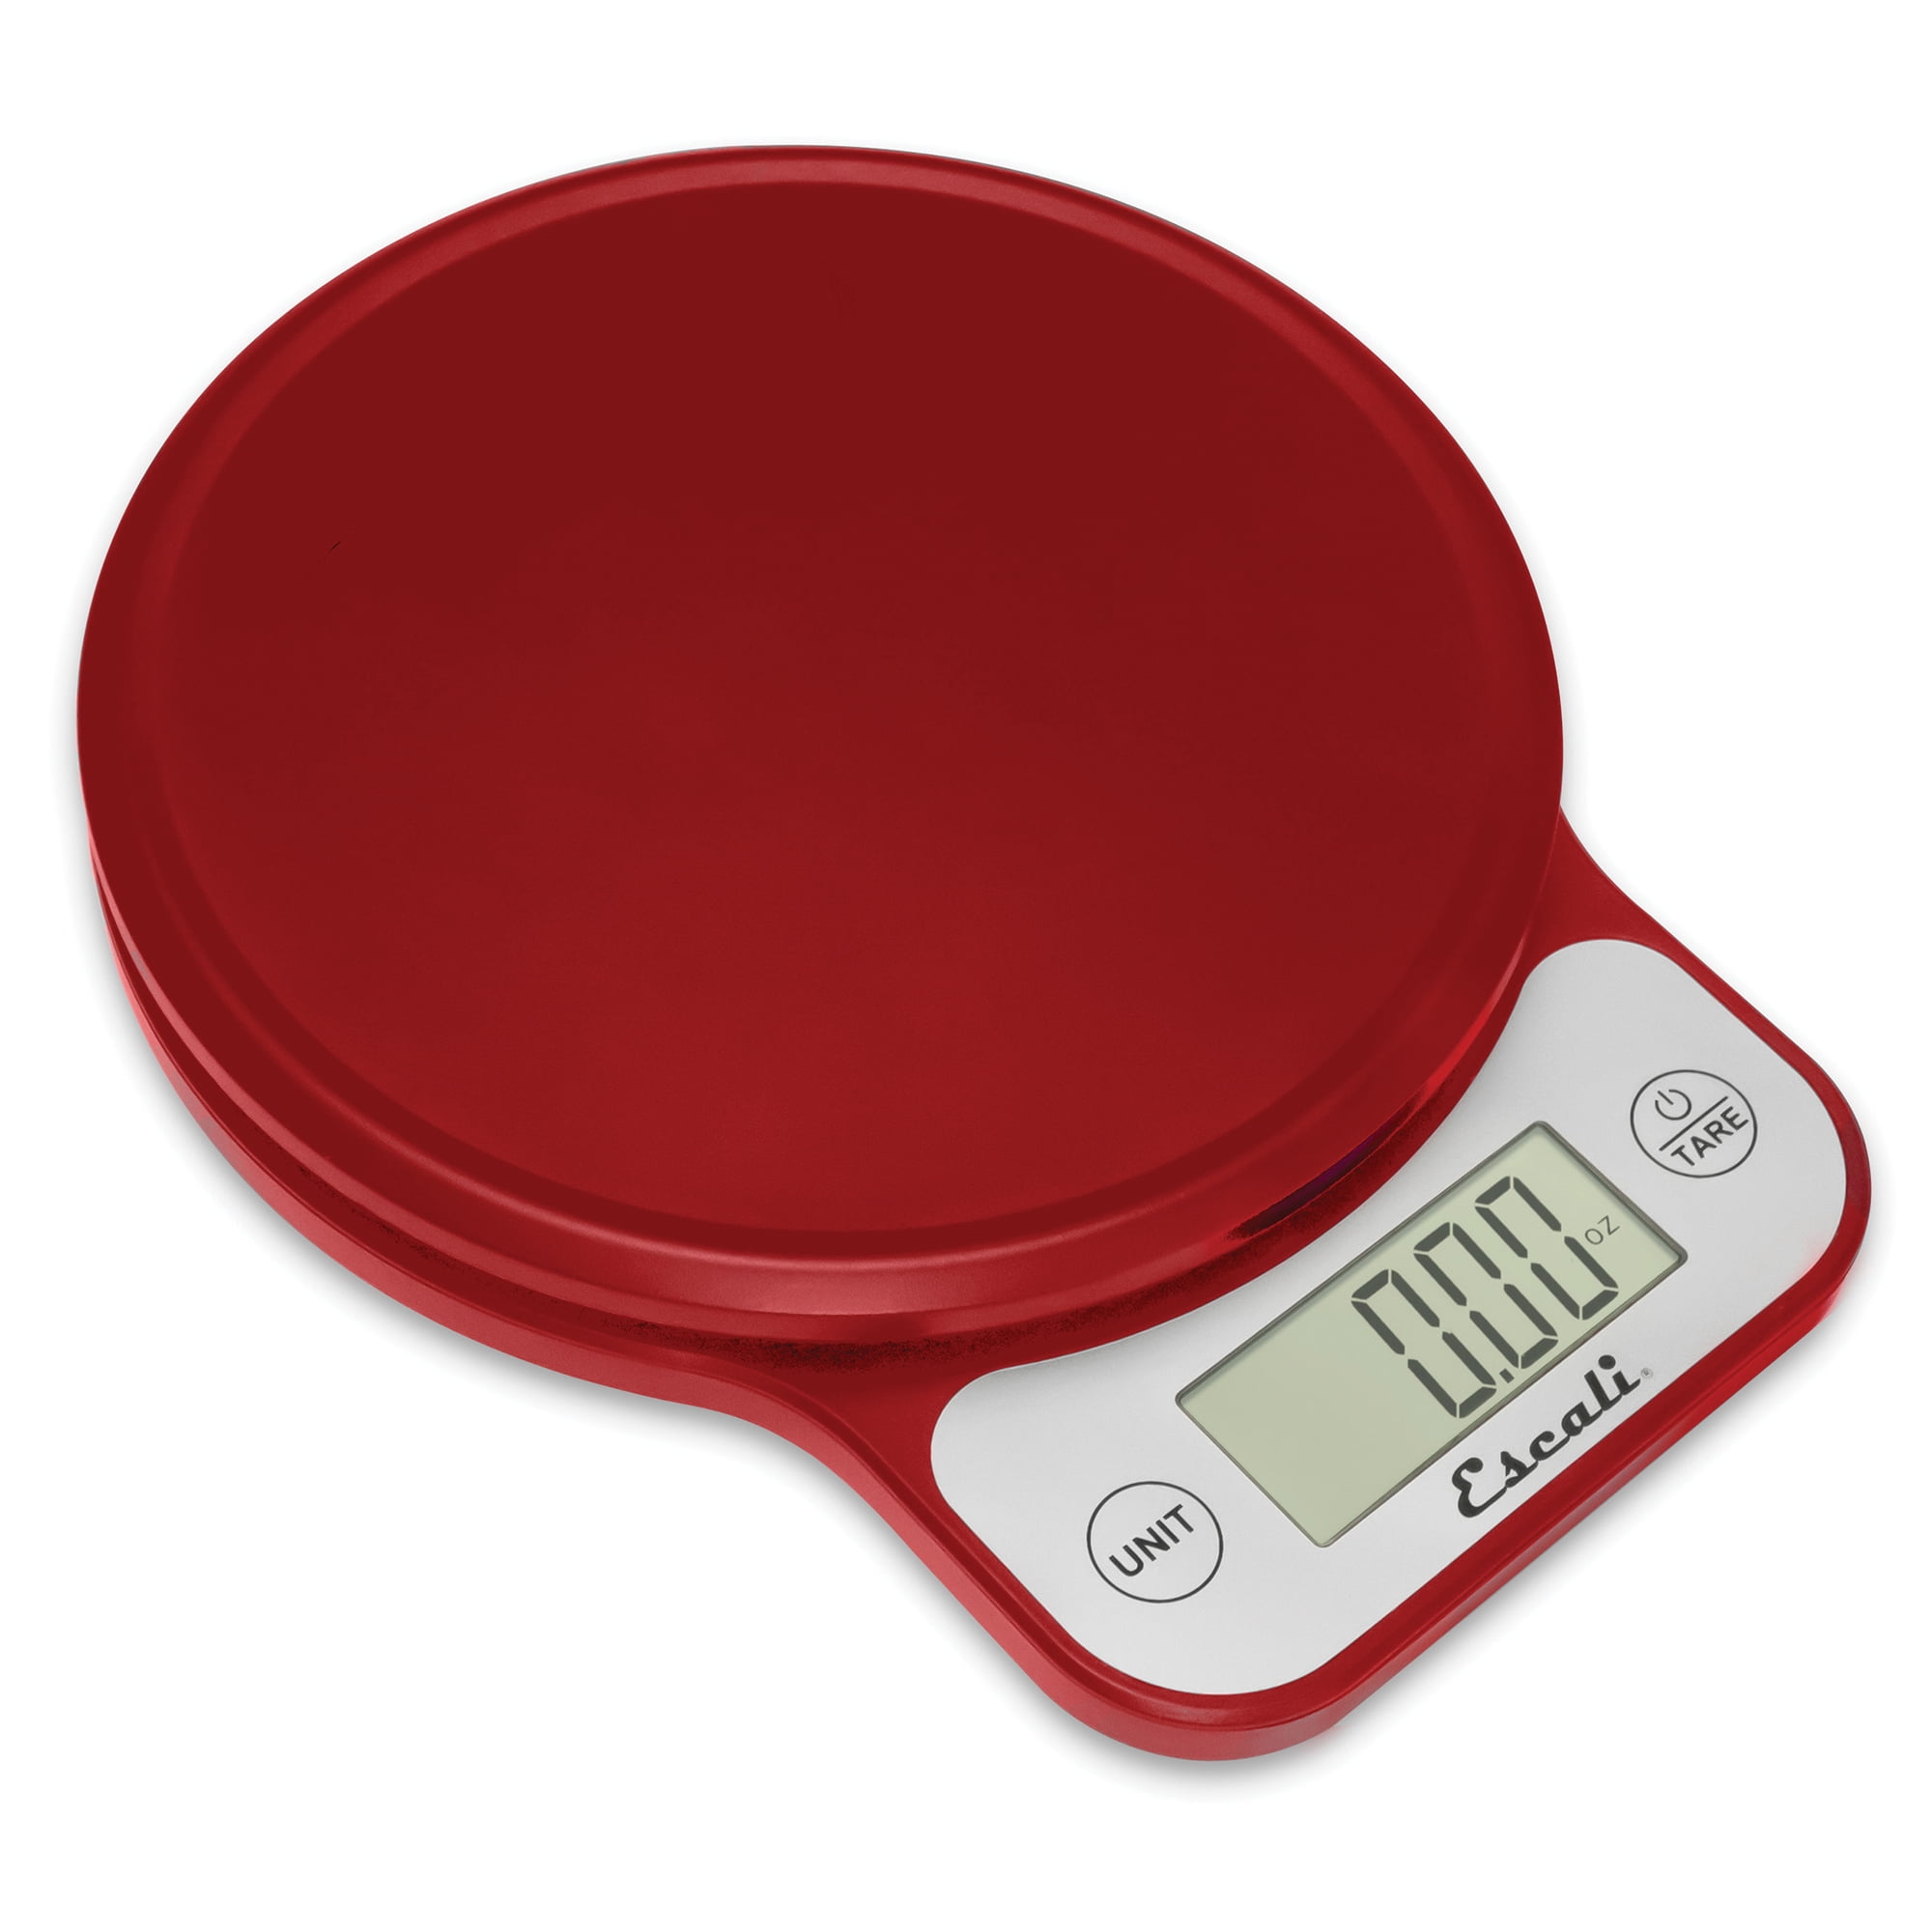 Escali Alimento 136DK Digital Kitchen Scale, Elite Food Measuring to The  Gram with Removable Stainless Steel Platform and LCD Display, Baking and